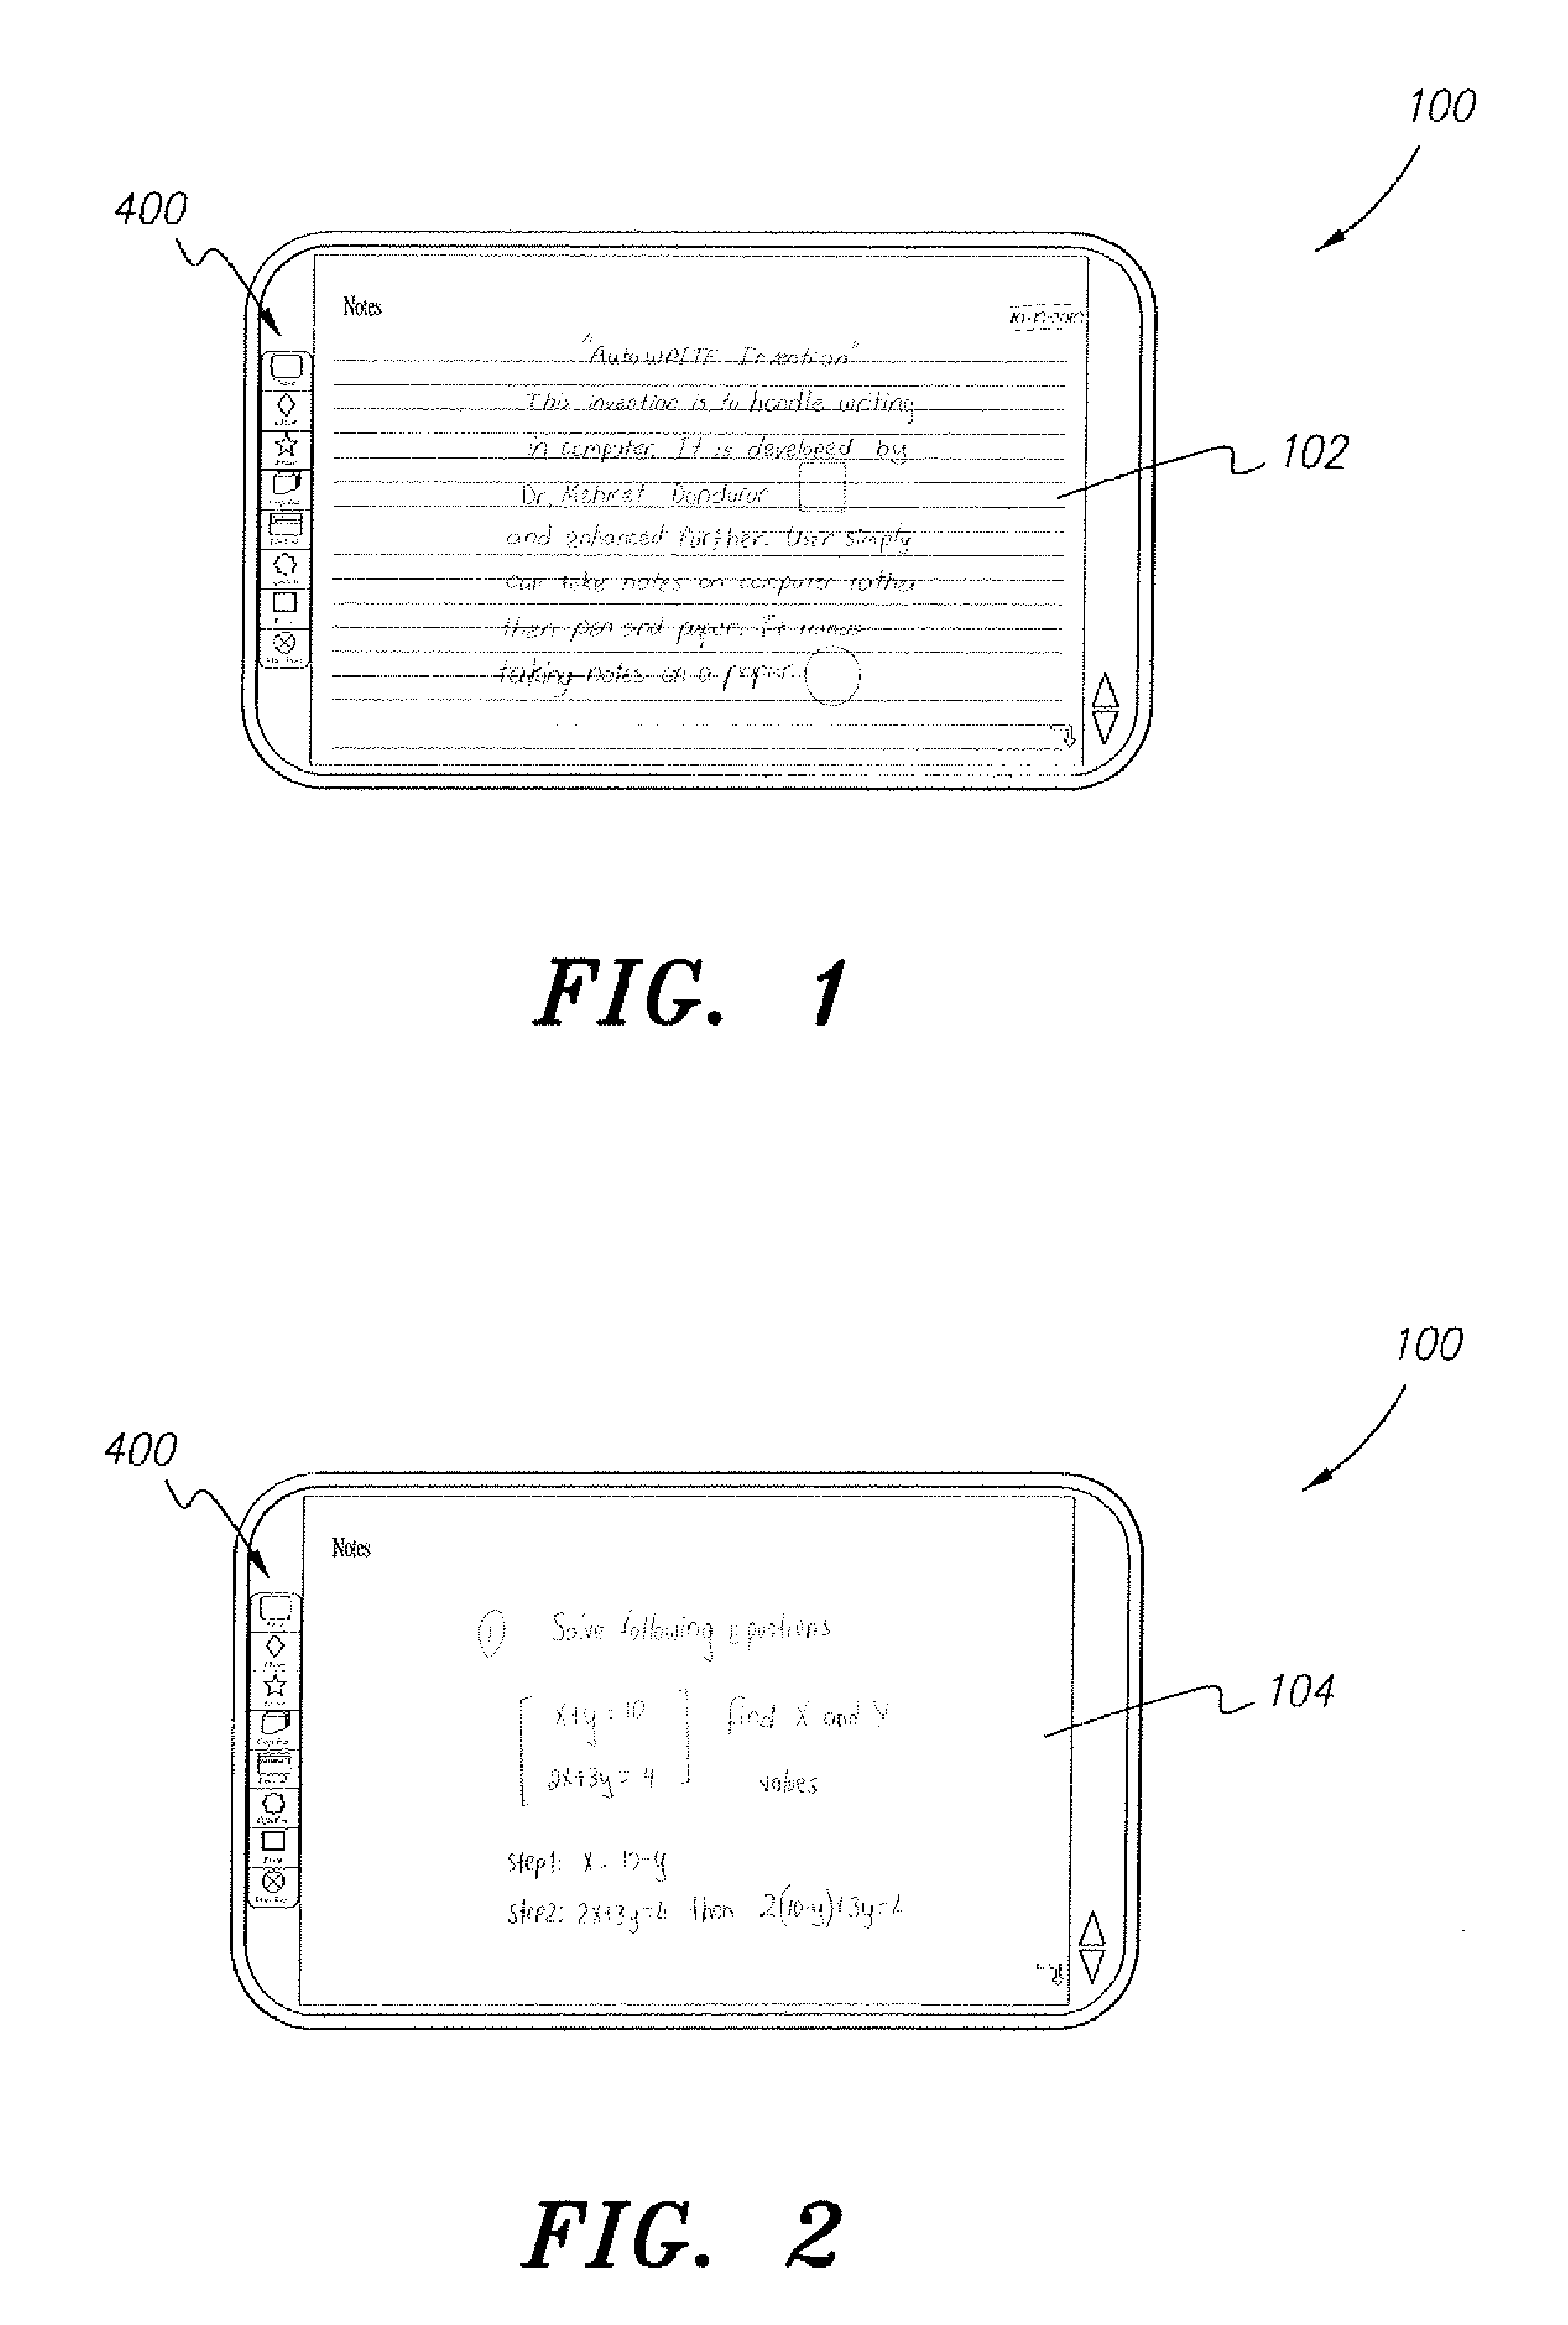 Electronic note-taking system and method